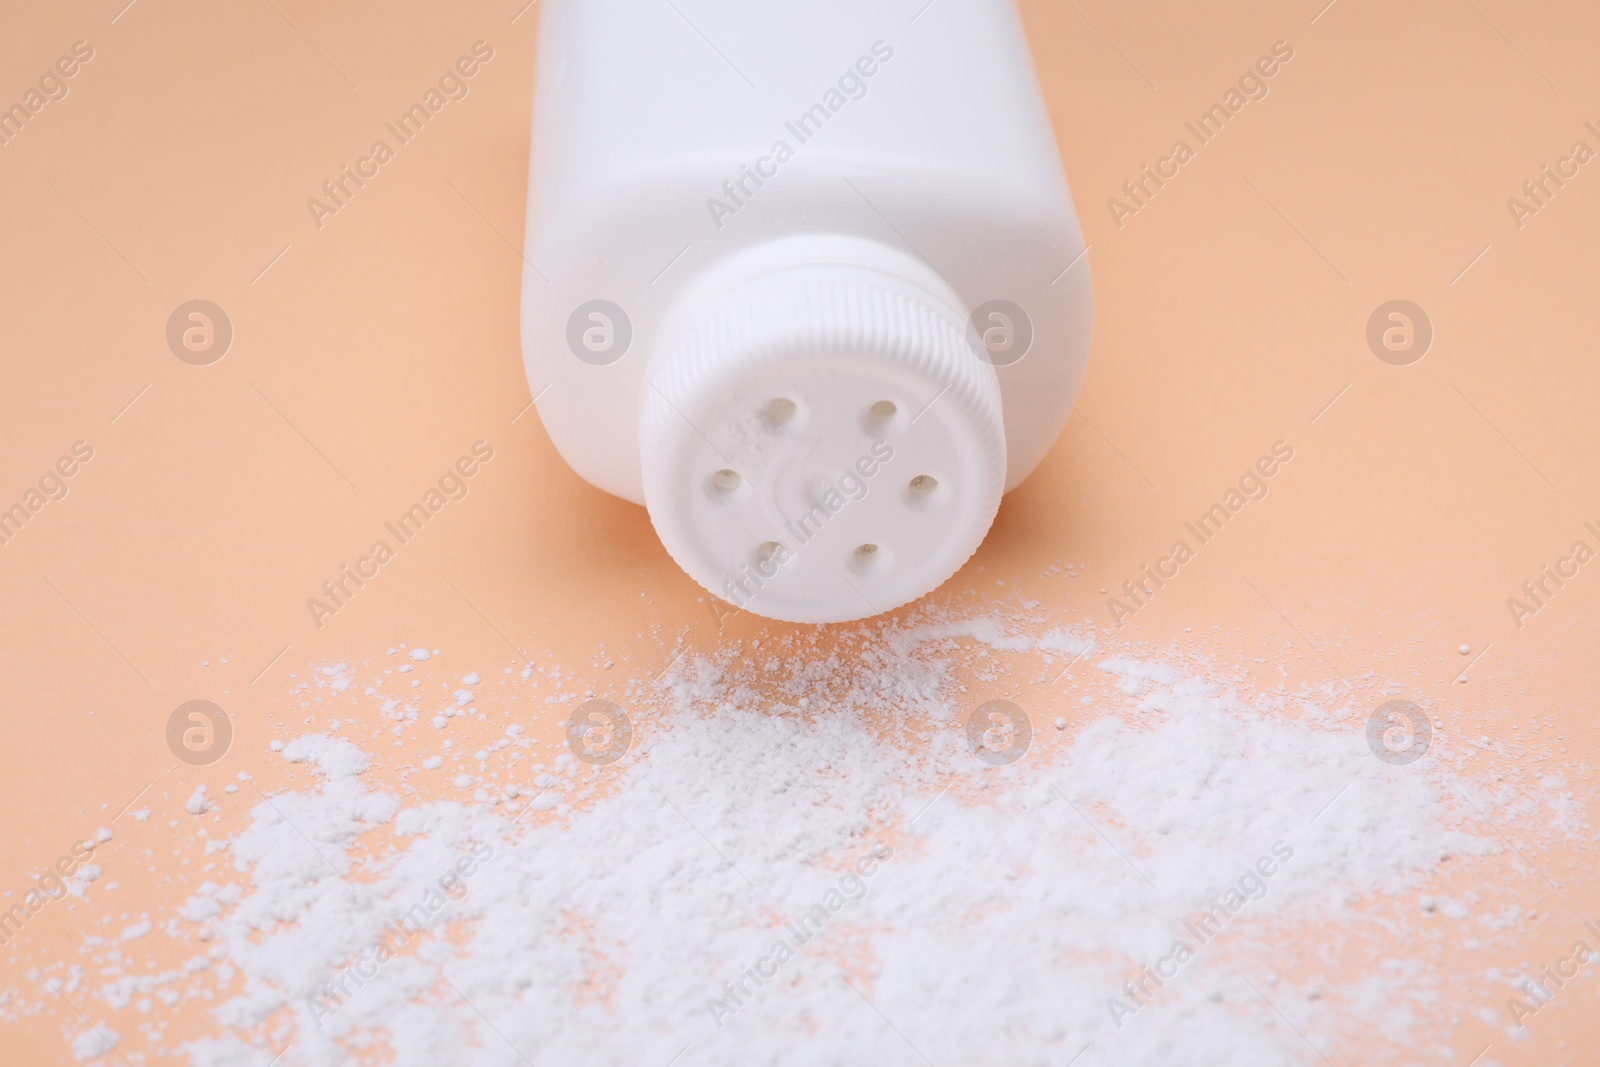 Photo of Bottle and scattered dusting powder on pale coral background, closeup. Baby cosmetic product